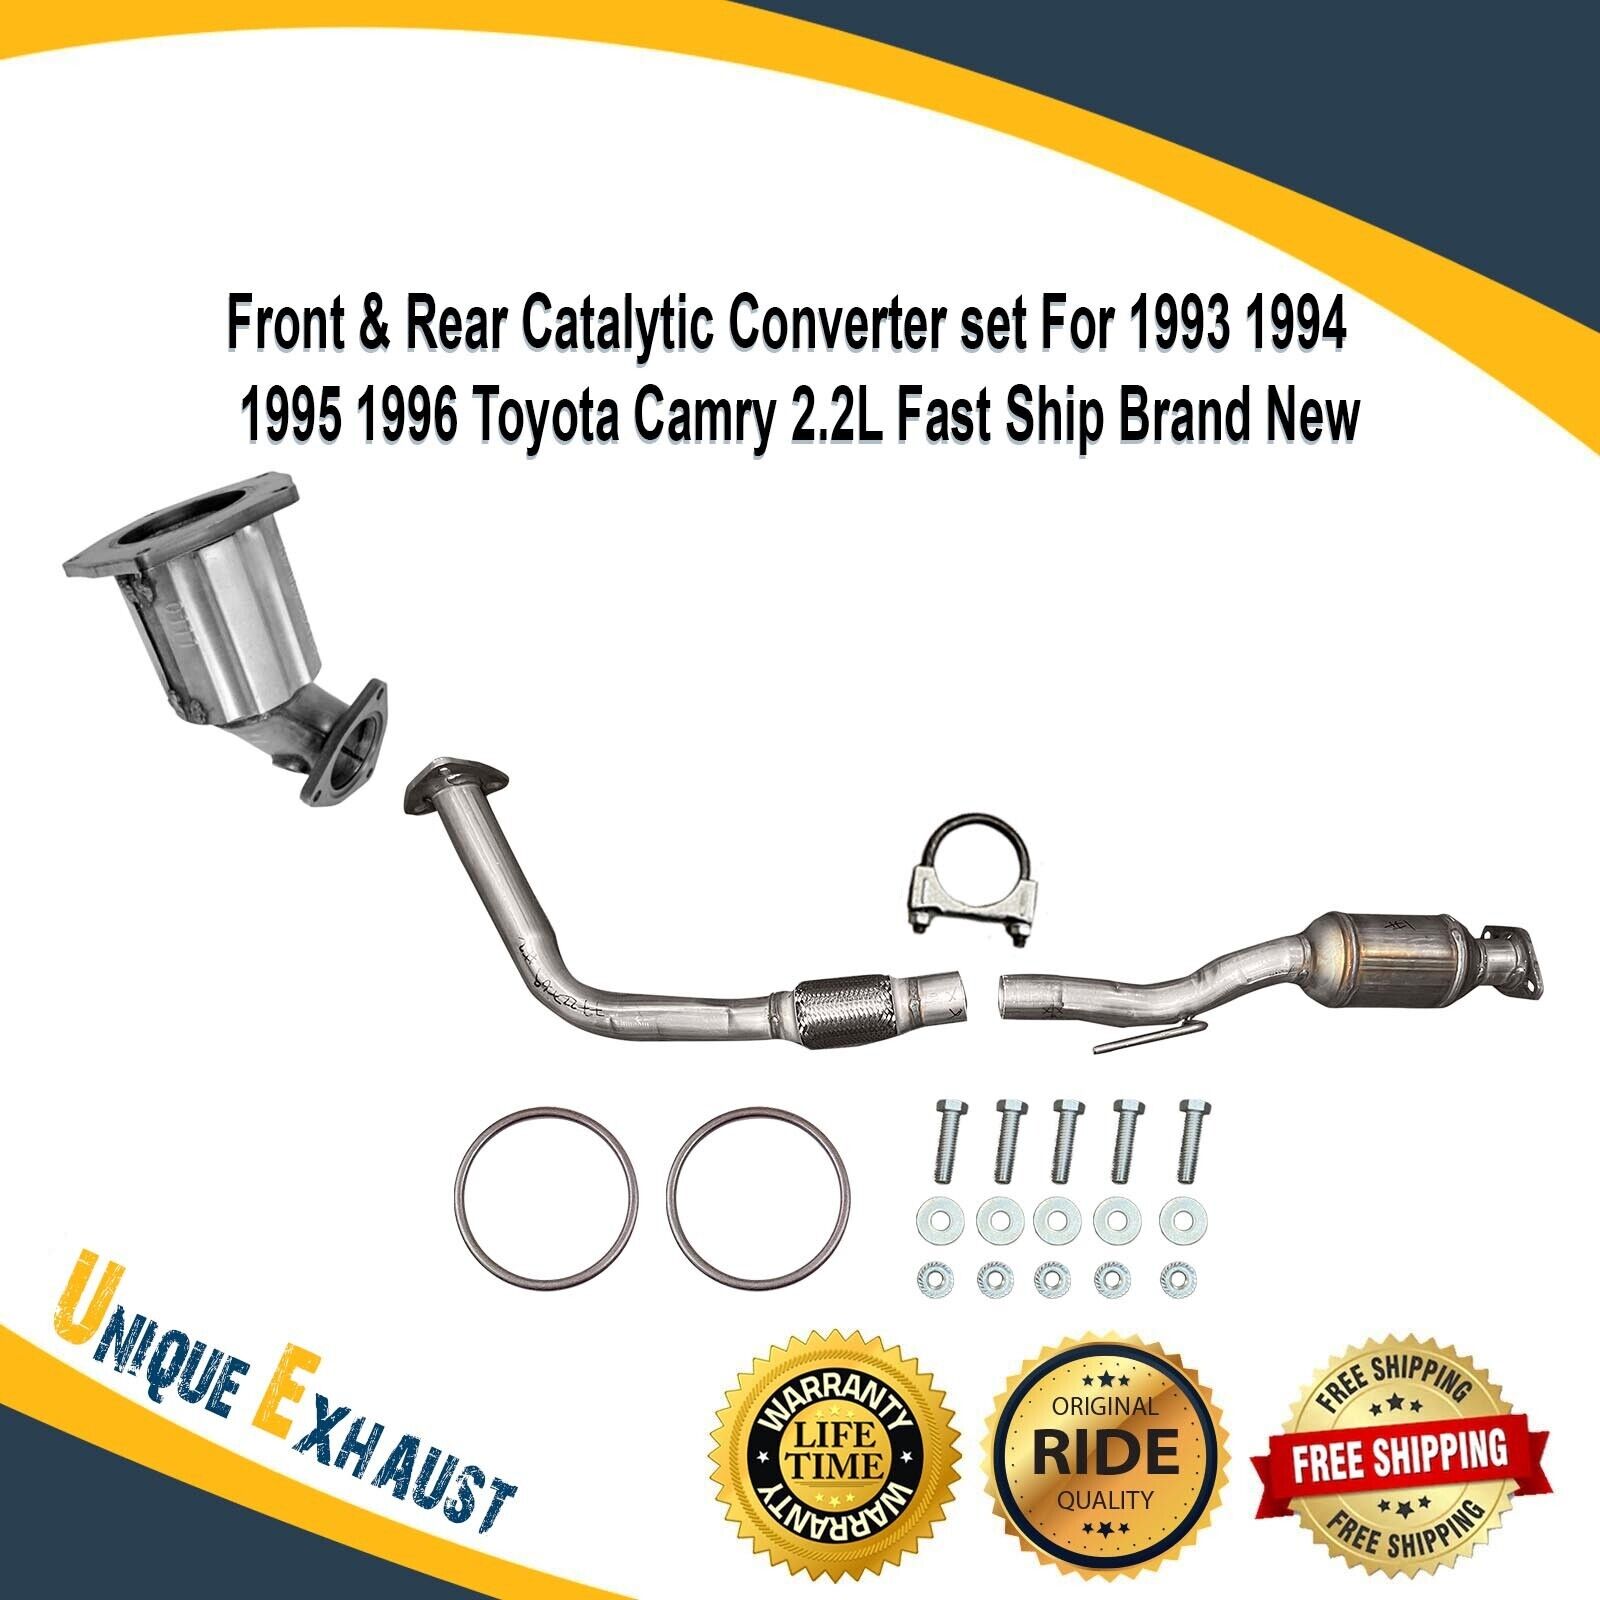 Front & Rear Catalytic Converter Set for 1993 1994 1995 1996 Toyota Camry 2.2L